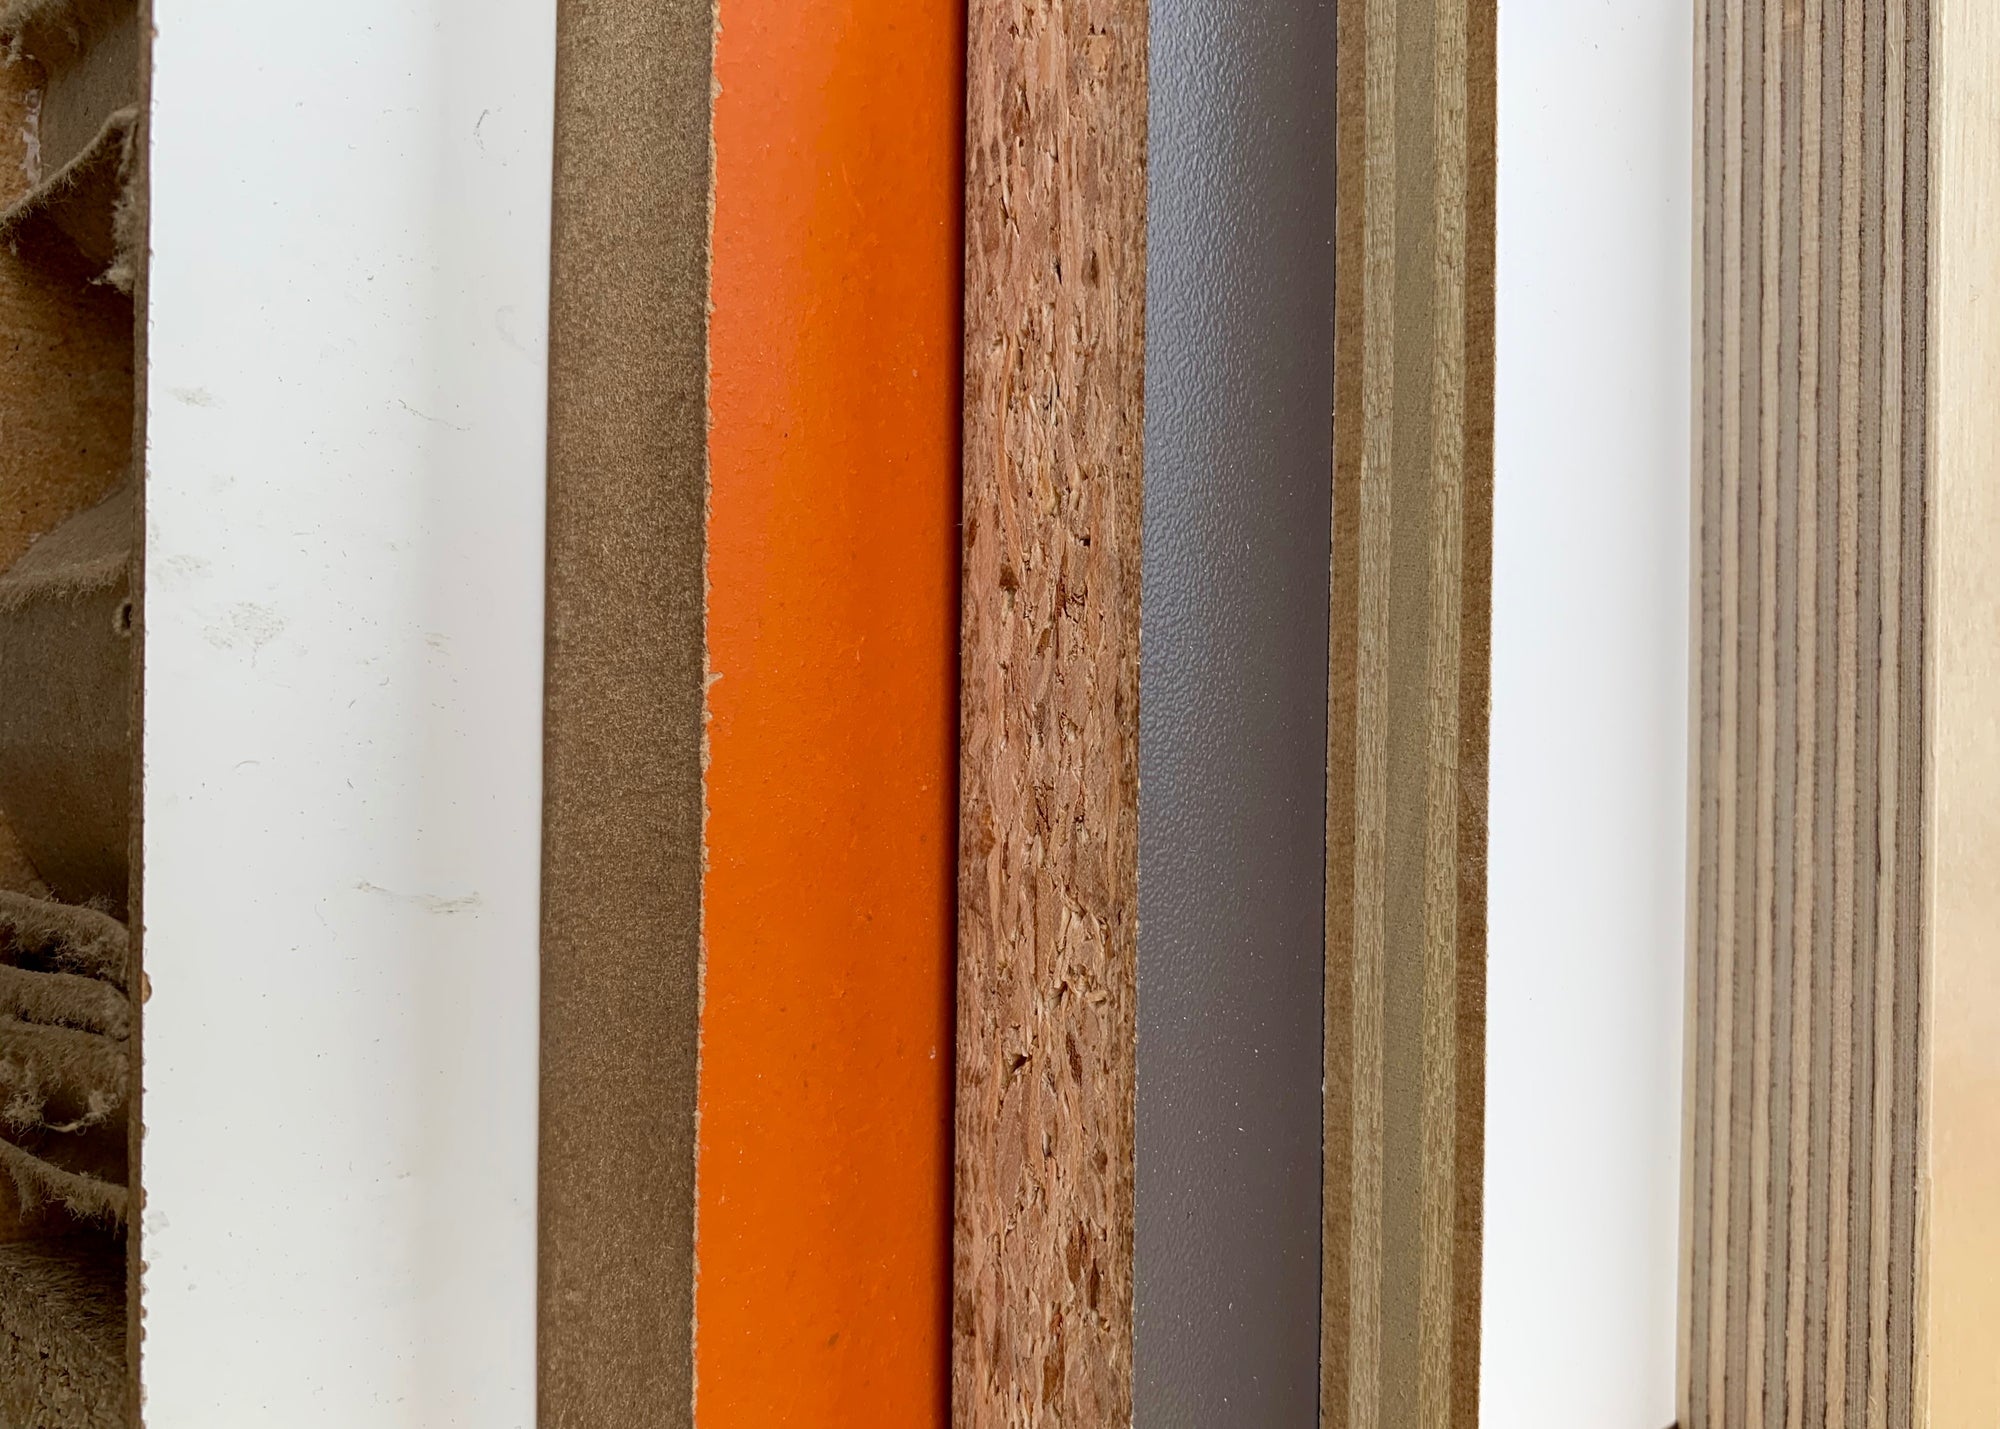 Textured panels in various colors and materials aligned vertically, no text visible.